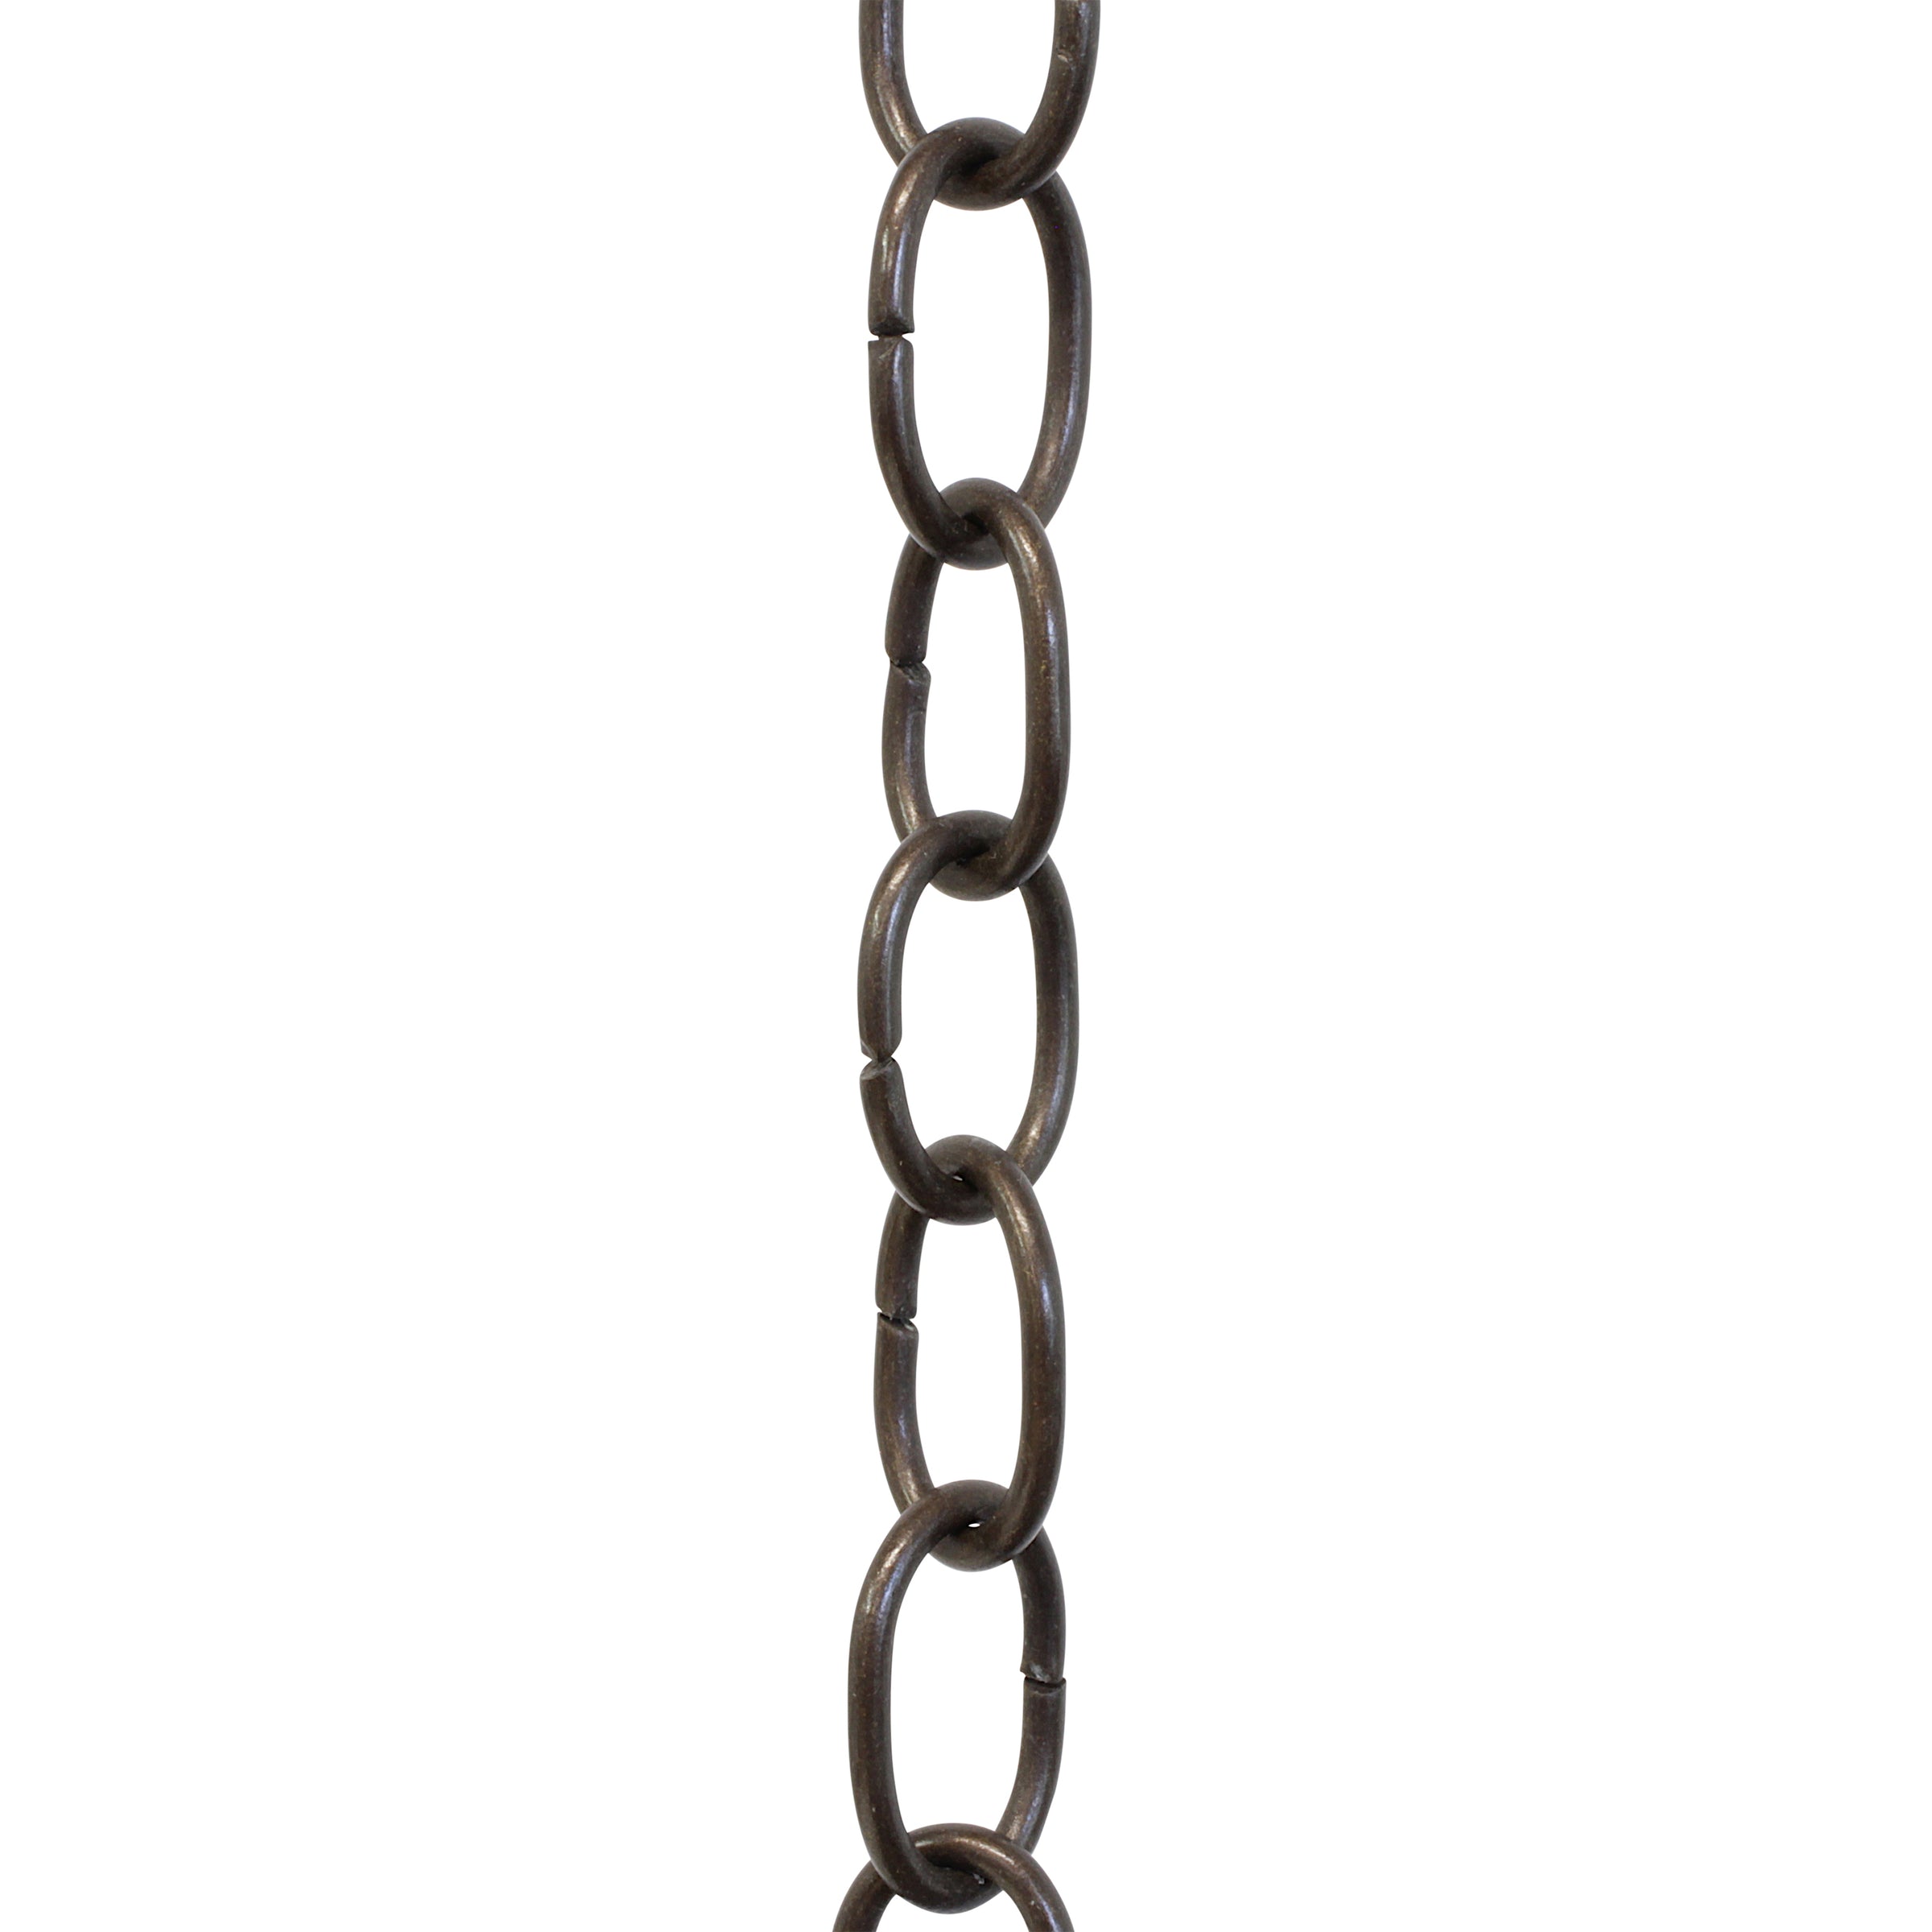  RCH Hardware CH-06-Brass Chain #06, Solid Brass Chain with  Light Oval Un Welded Link : Tools & Home Improvement